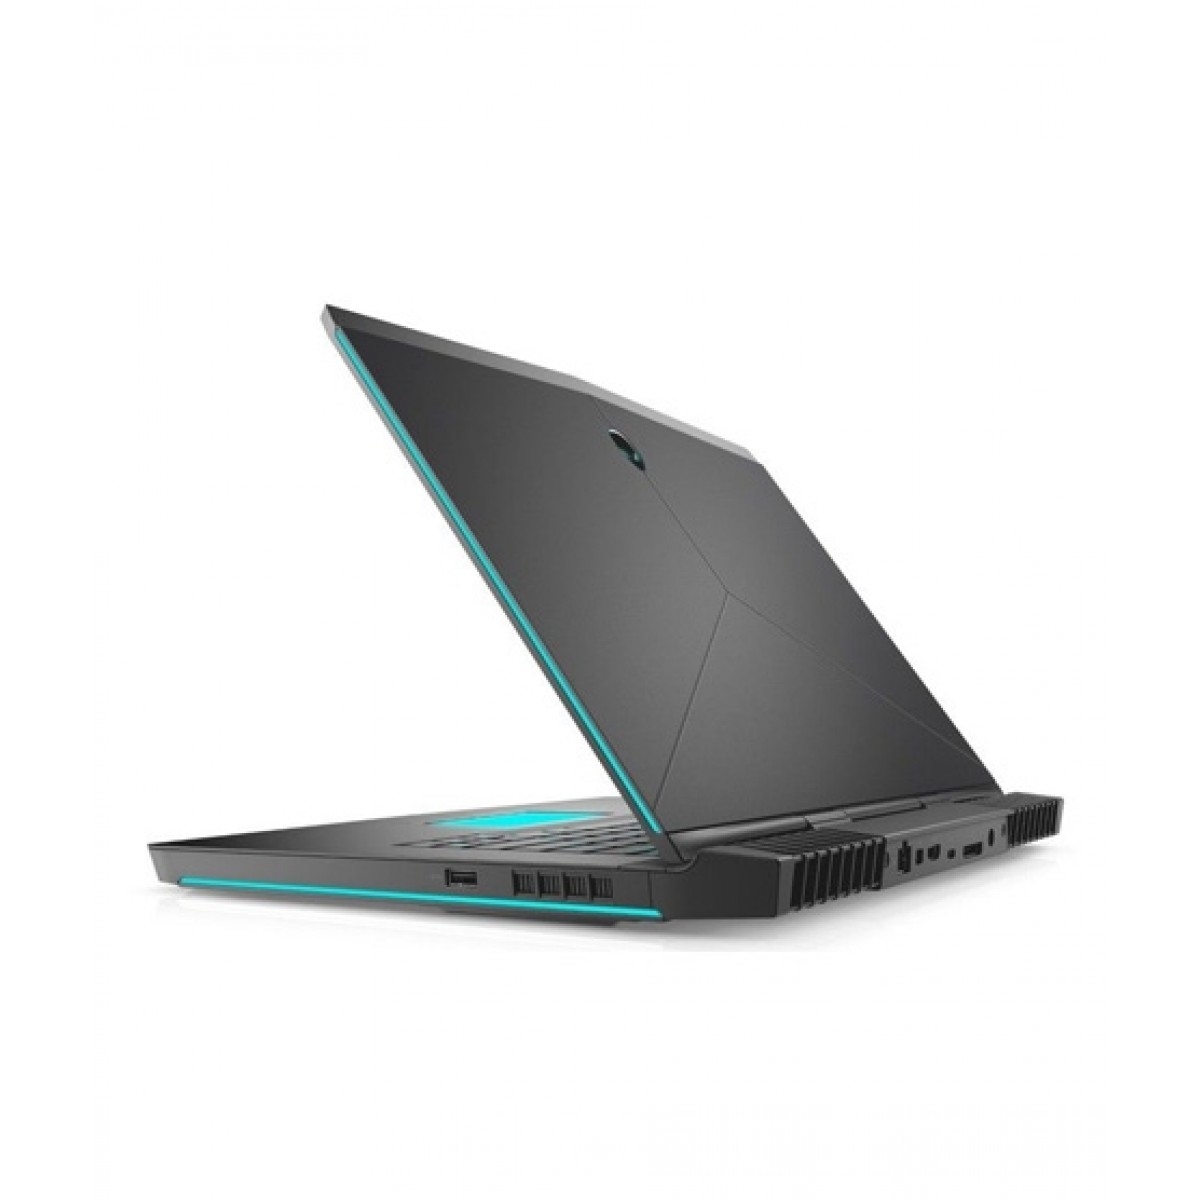 Dell Alienware 15 R4 Review: Dominating Performance Unleashed